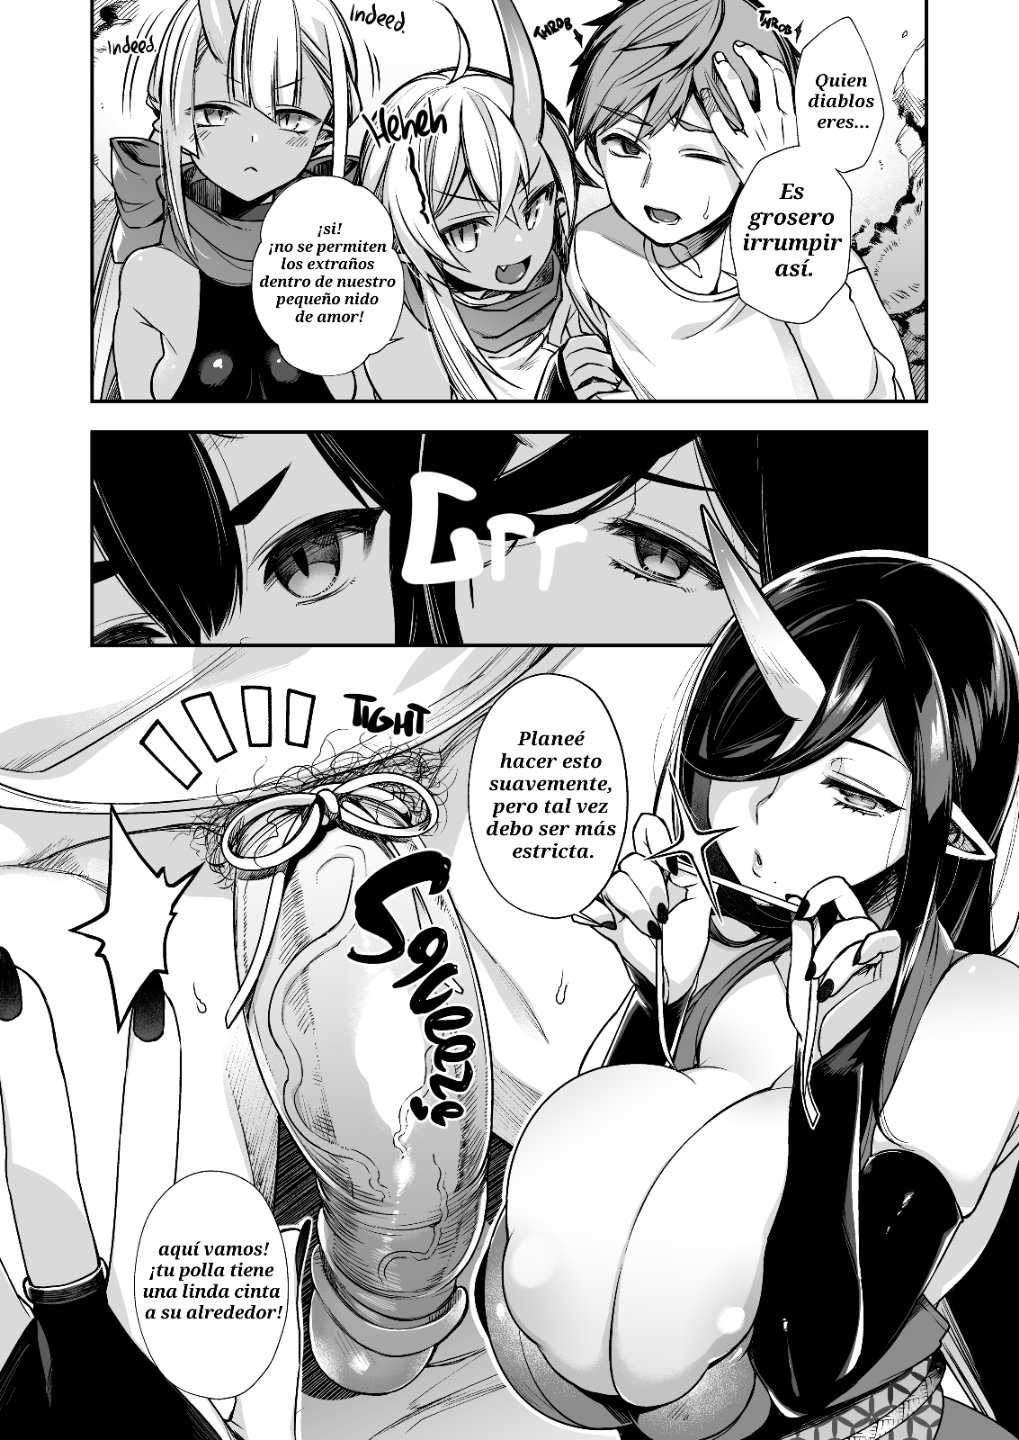 MATING WITH ONI PART 6 final ? - 4